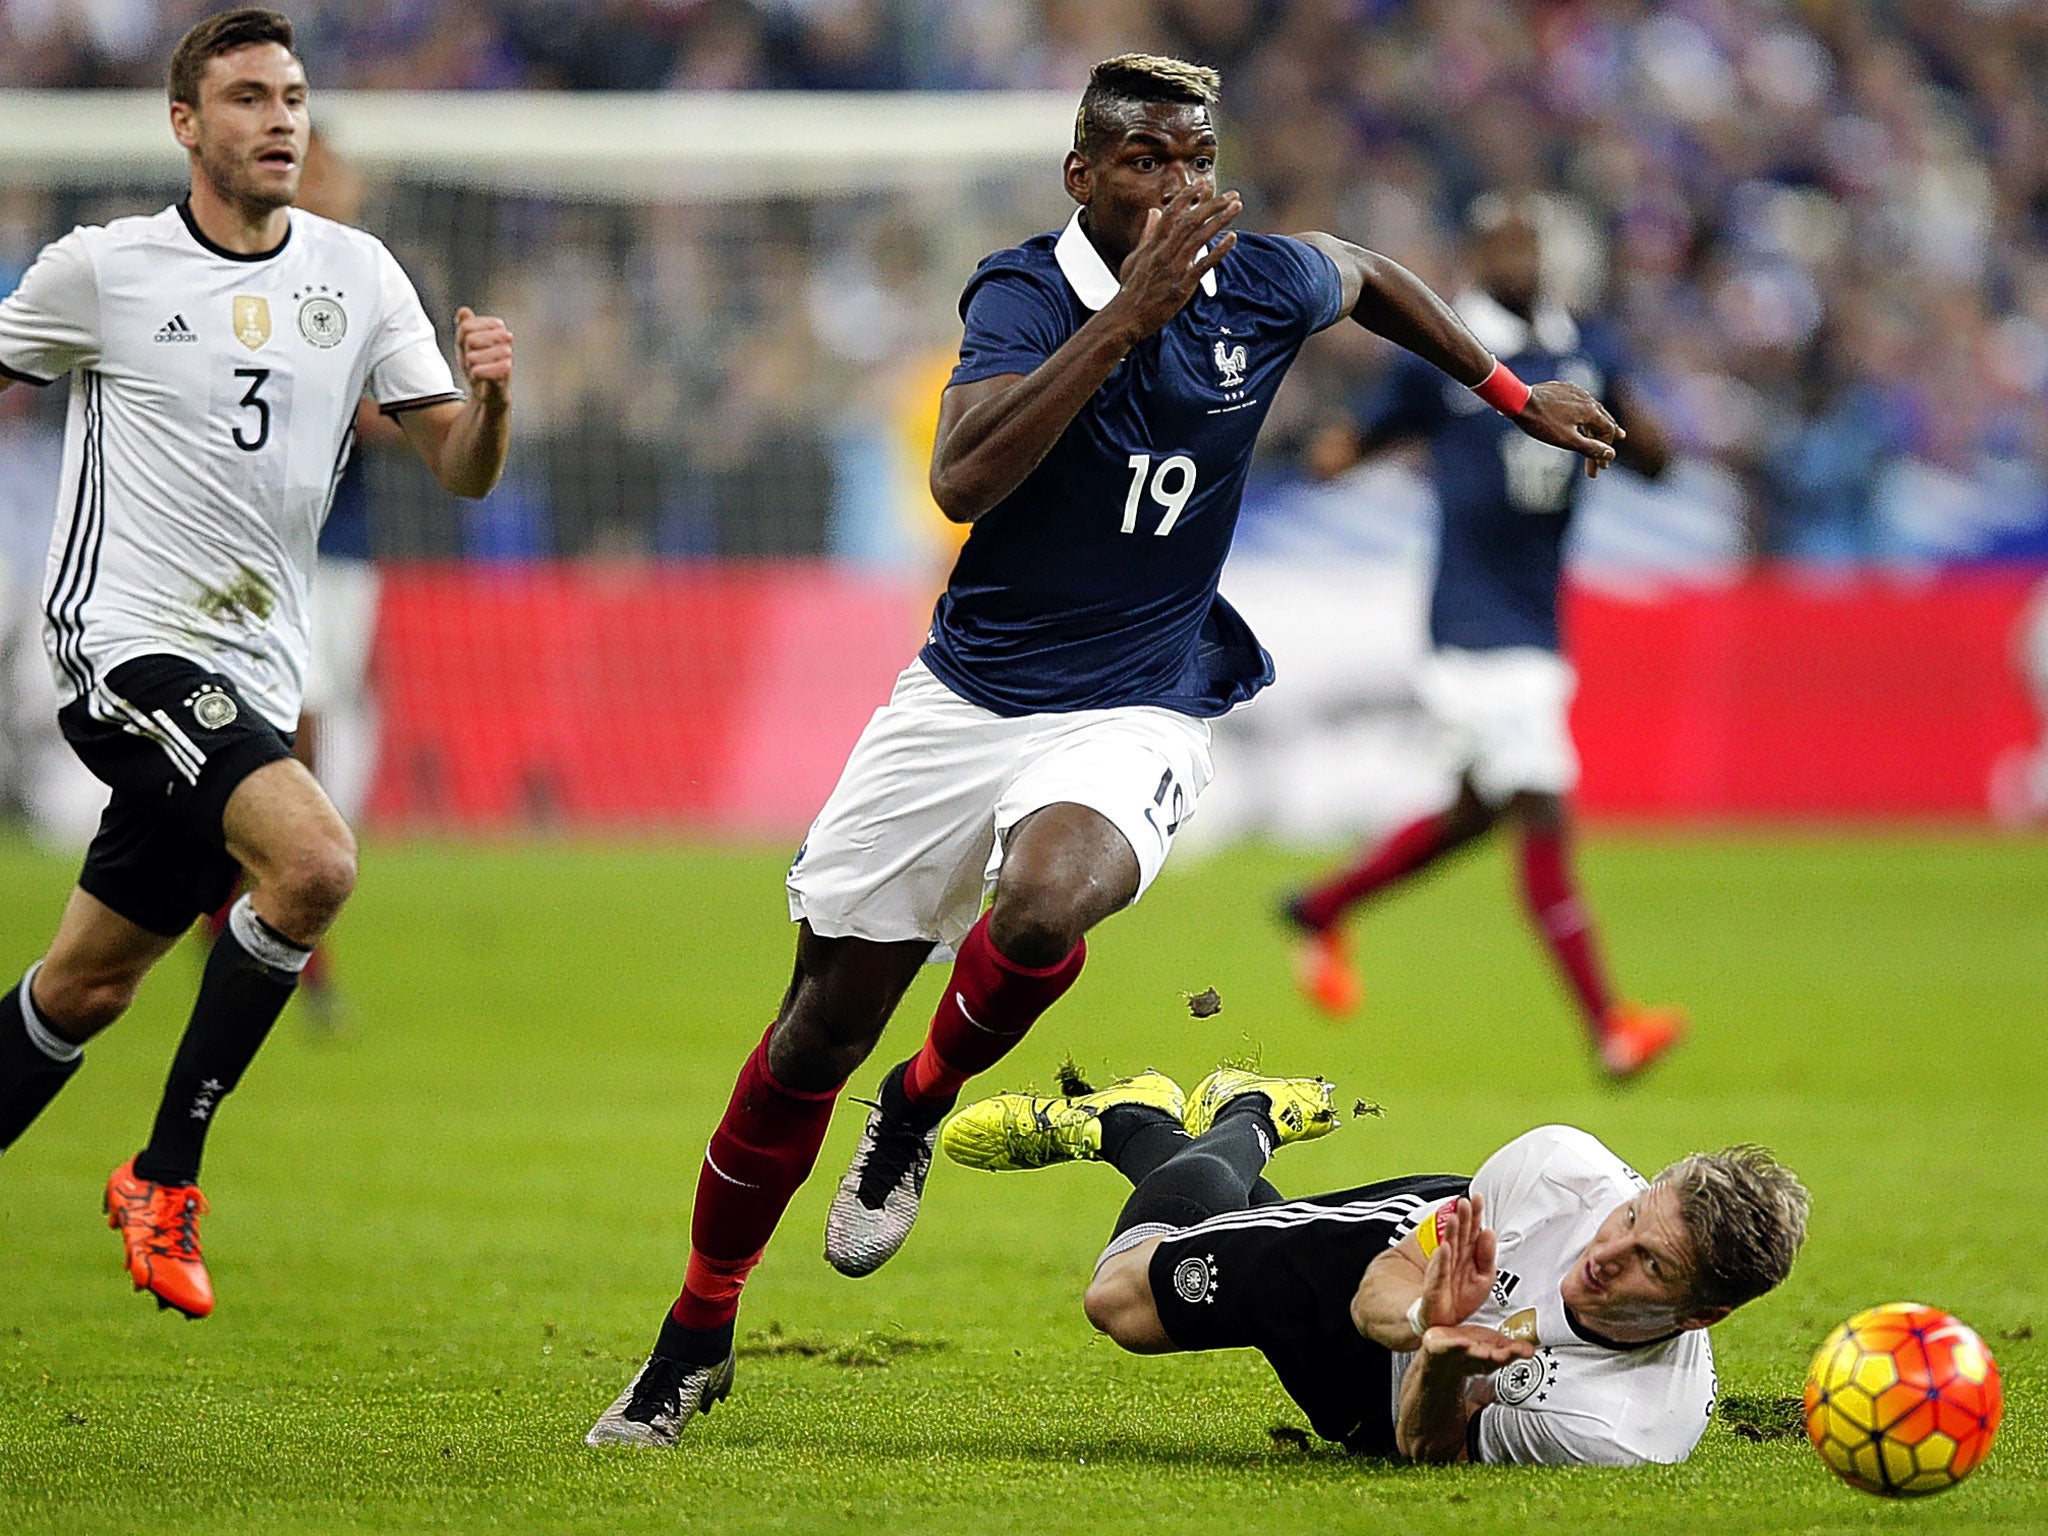 Paul Pogba is at the forefront of a multi-cultural France side emulating the class of ’98